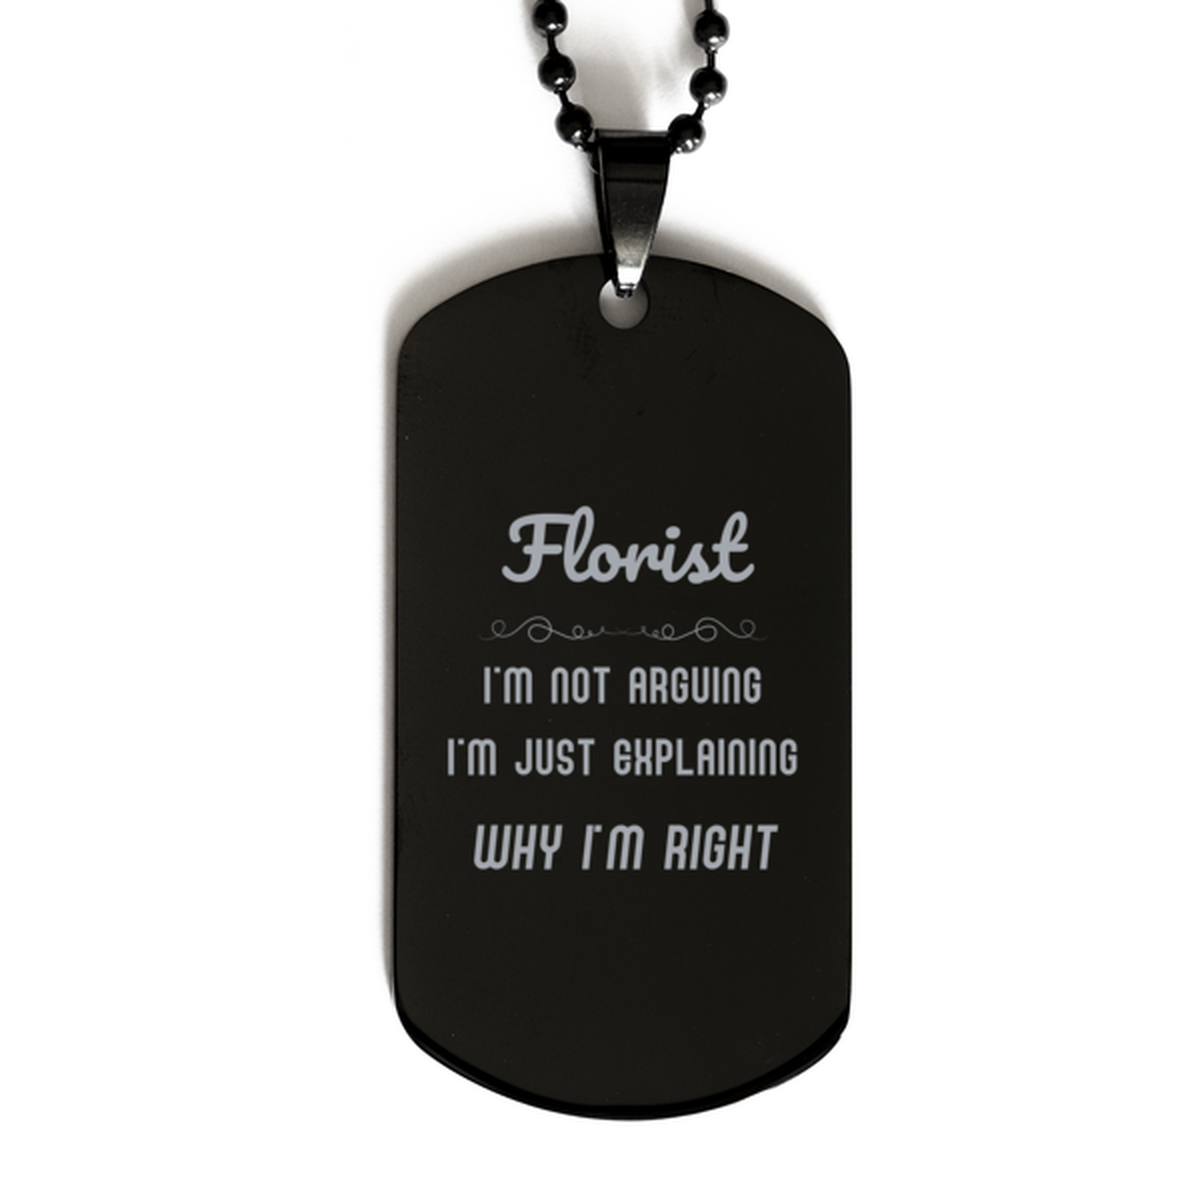 Florist I'm not Arguing. I'm Just Explaining Why I'm RIGHT Black Dog Tag, Funny Saying Quote Florist Gifts For Florist Graduation Birthday Christmas Gifts for Men Women Coworker